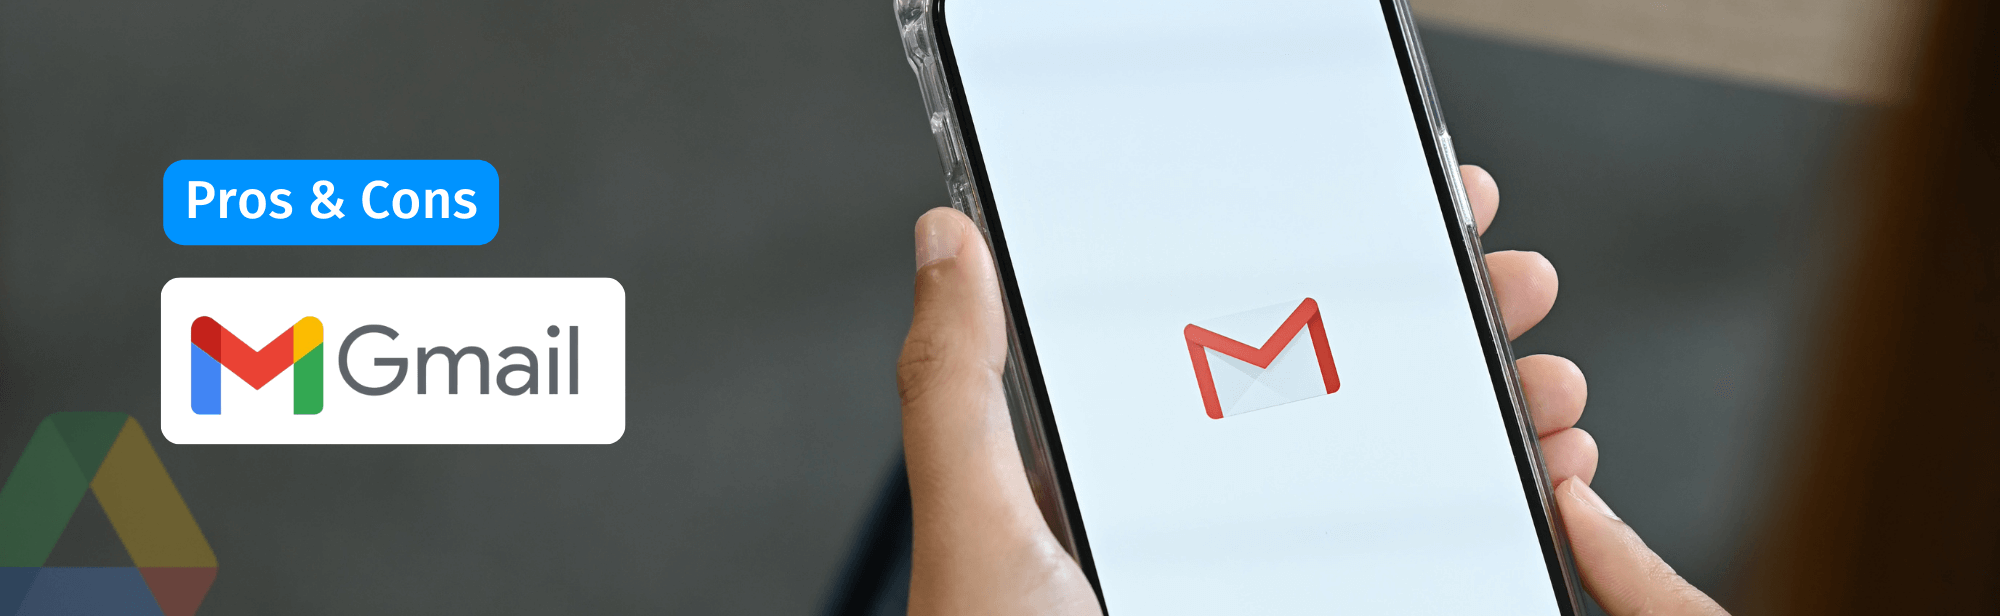 Hosting Email on Google: Gmail Pros & Cons